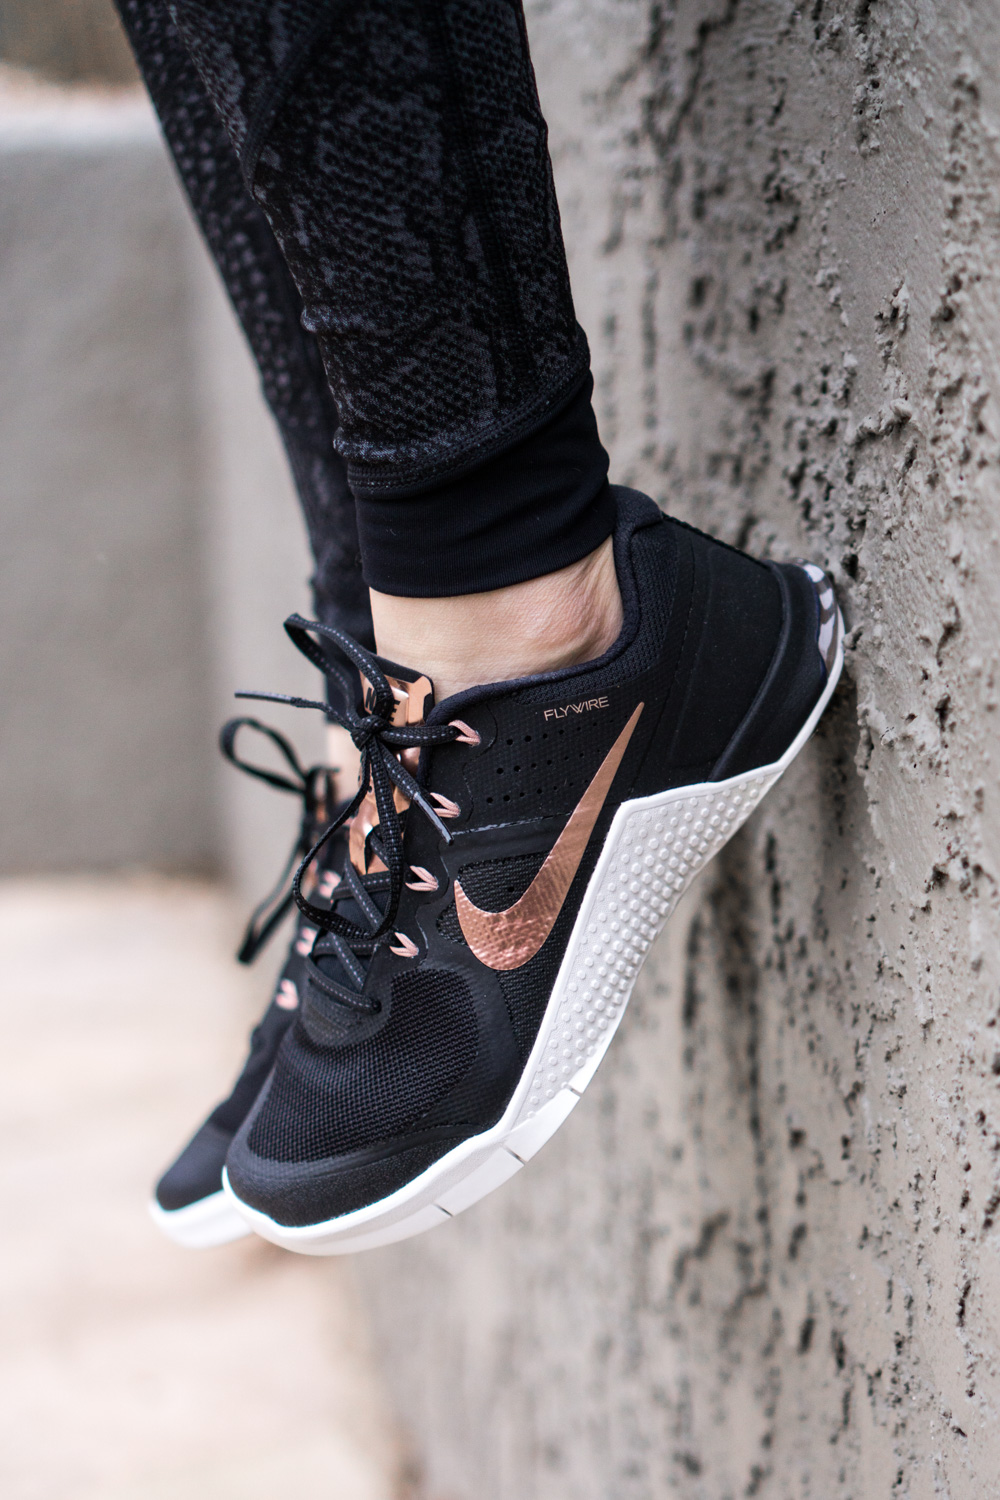 nike metcon 5 black and rose gold